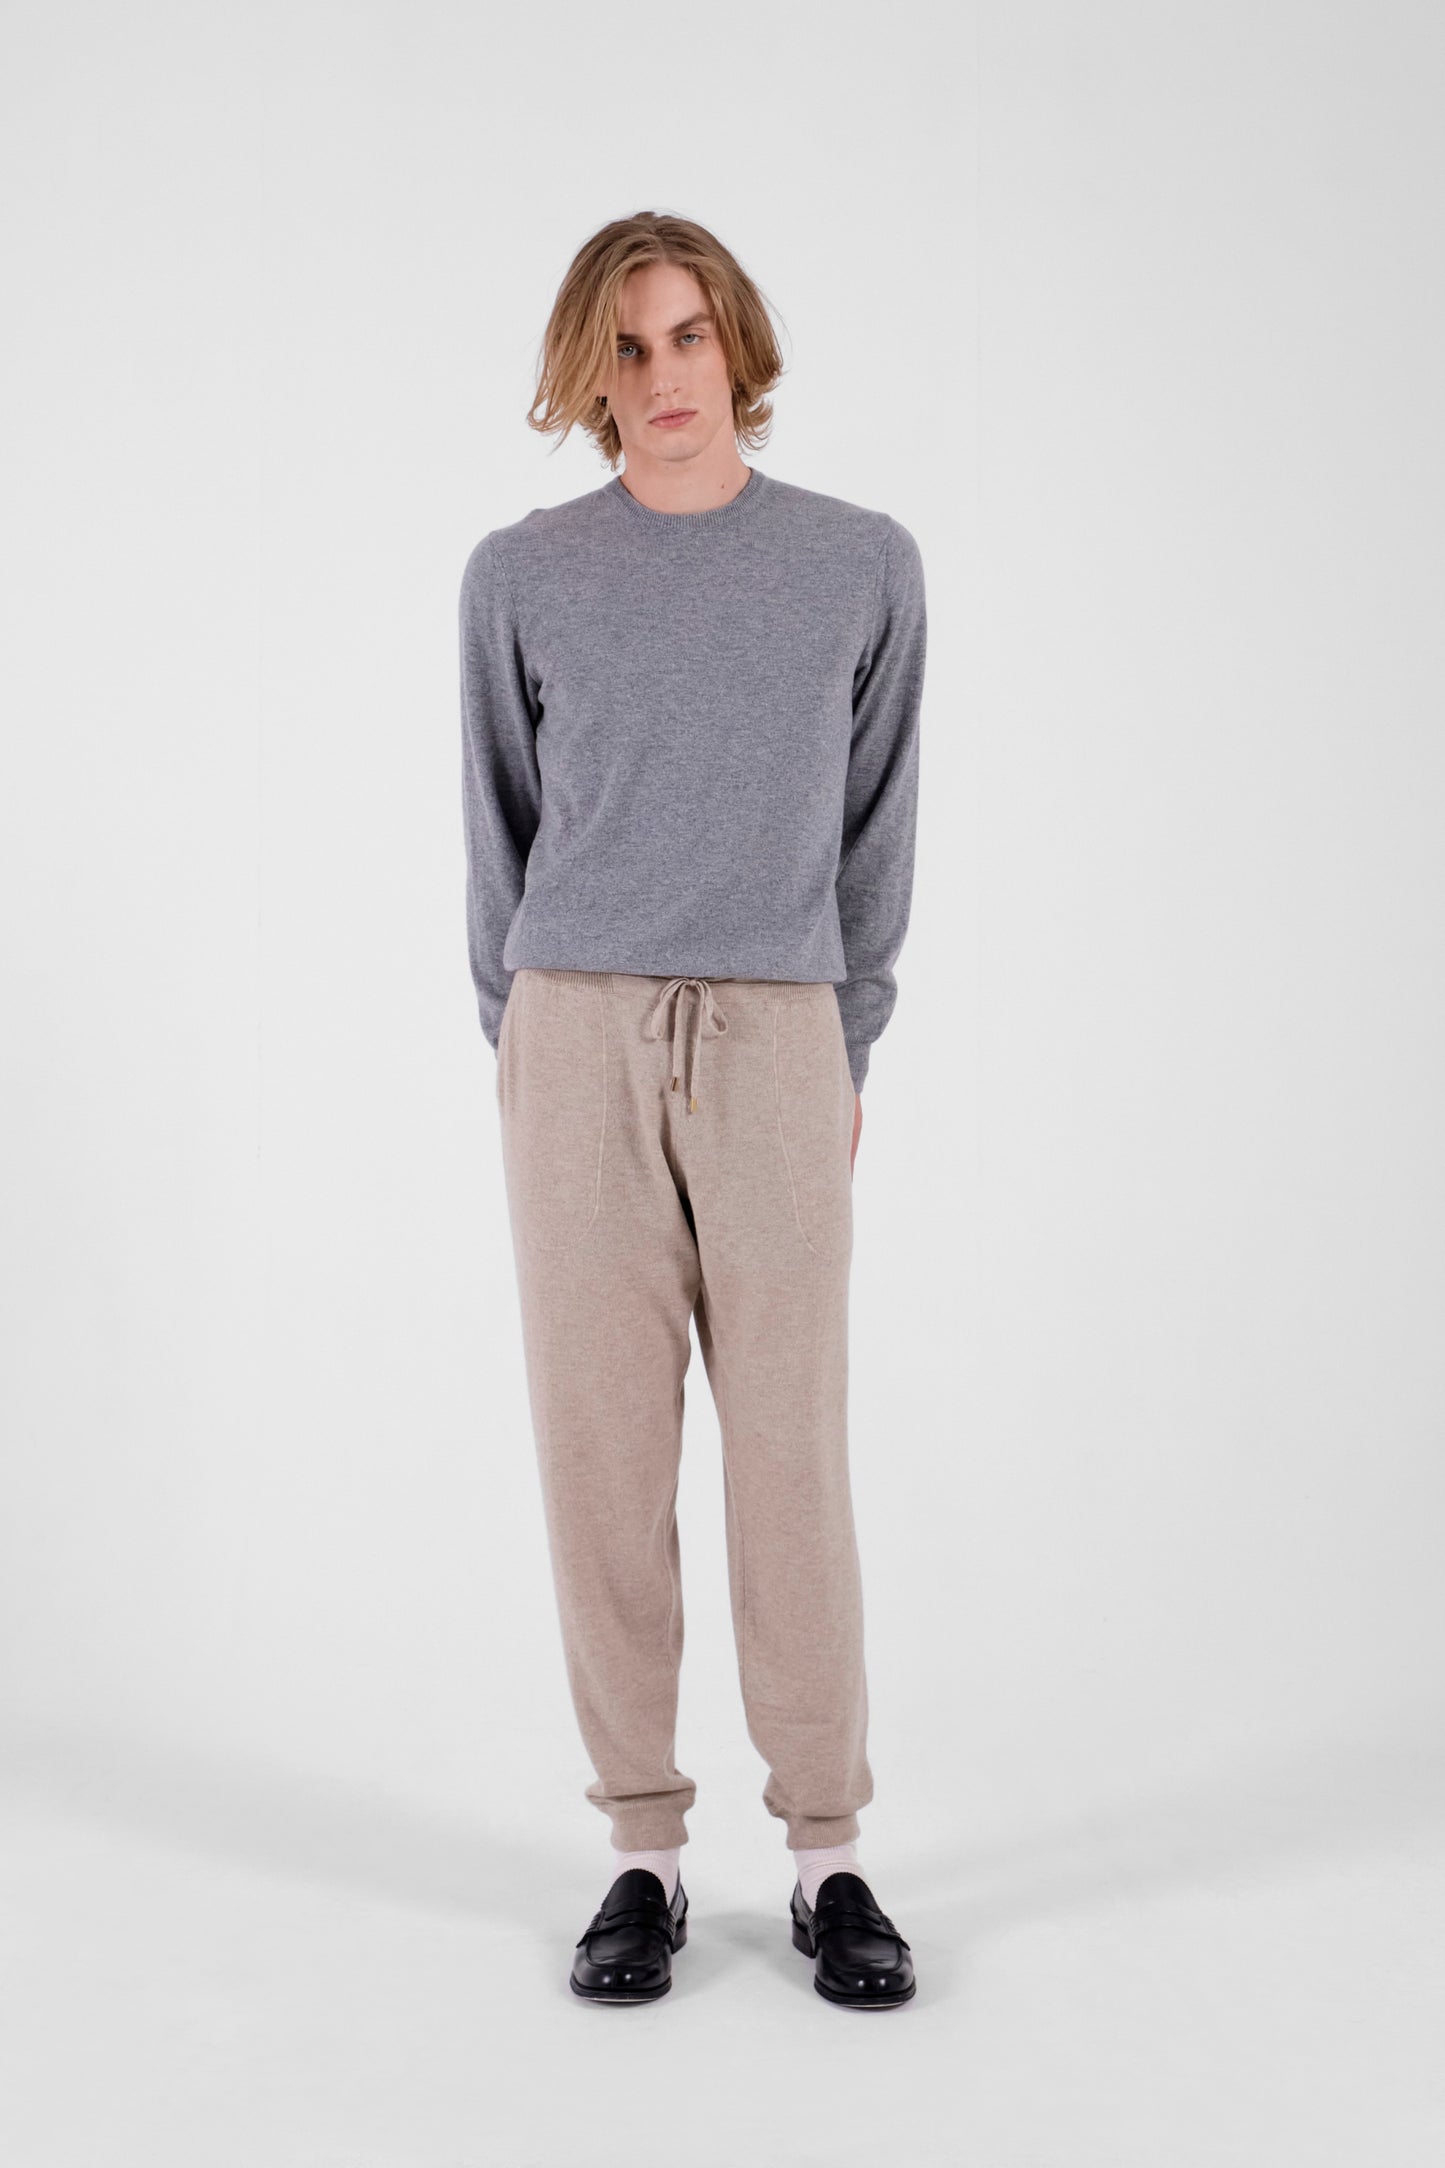 Beige jogging trousers with narrow bottom